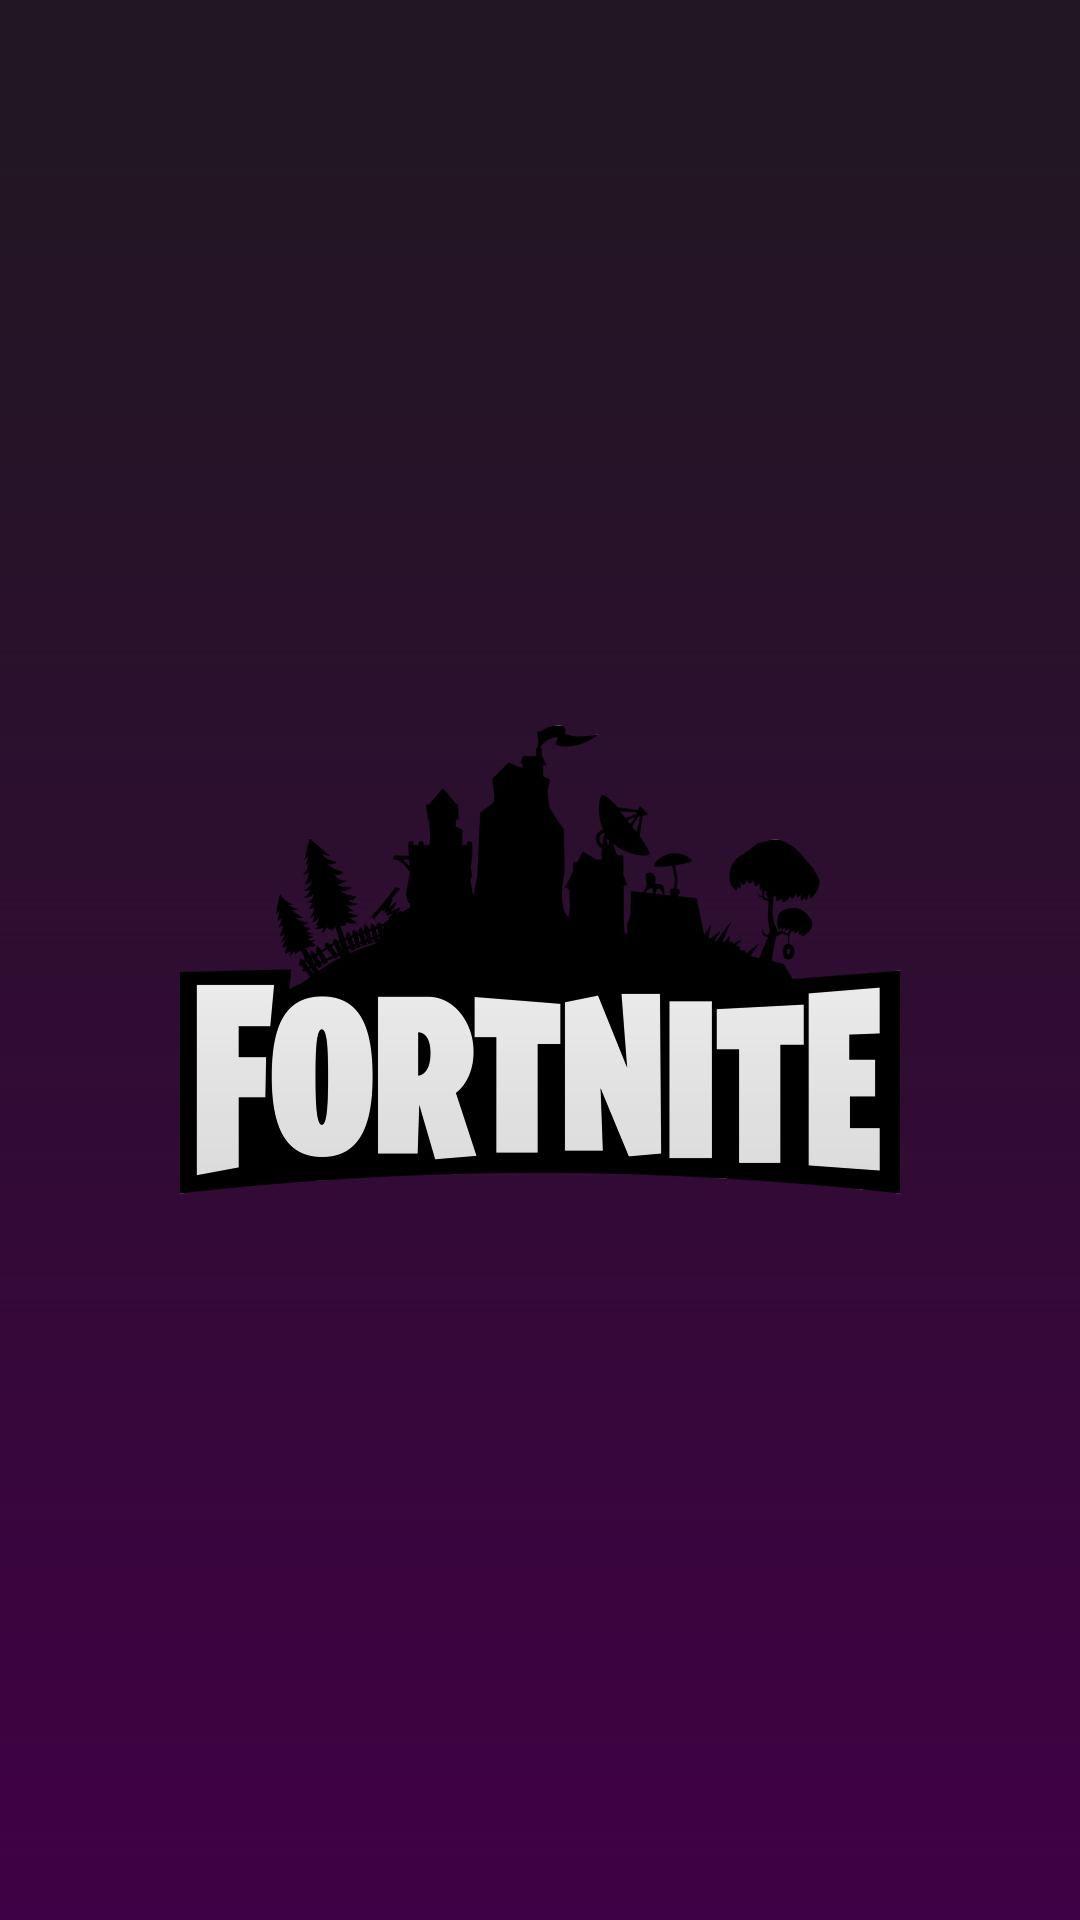 Fortnite wallpapers Whatsup? we have a website to get more FREE V